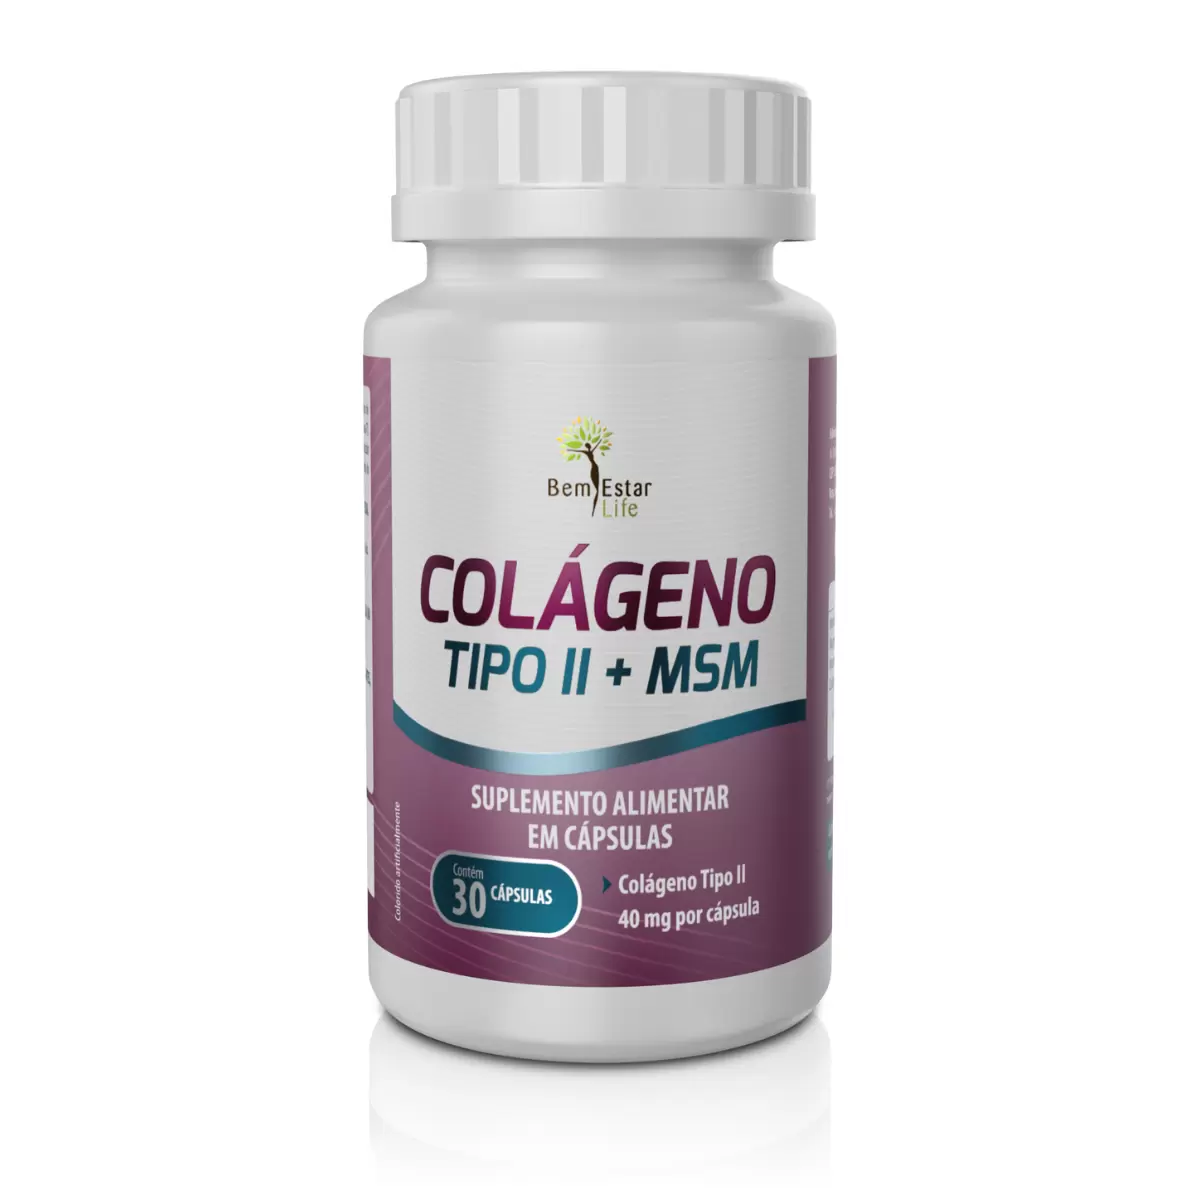 COLAGENO  TIPO II + MSM